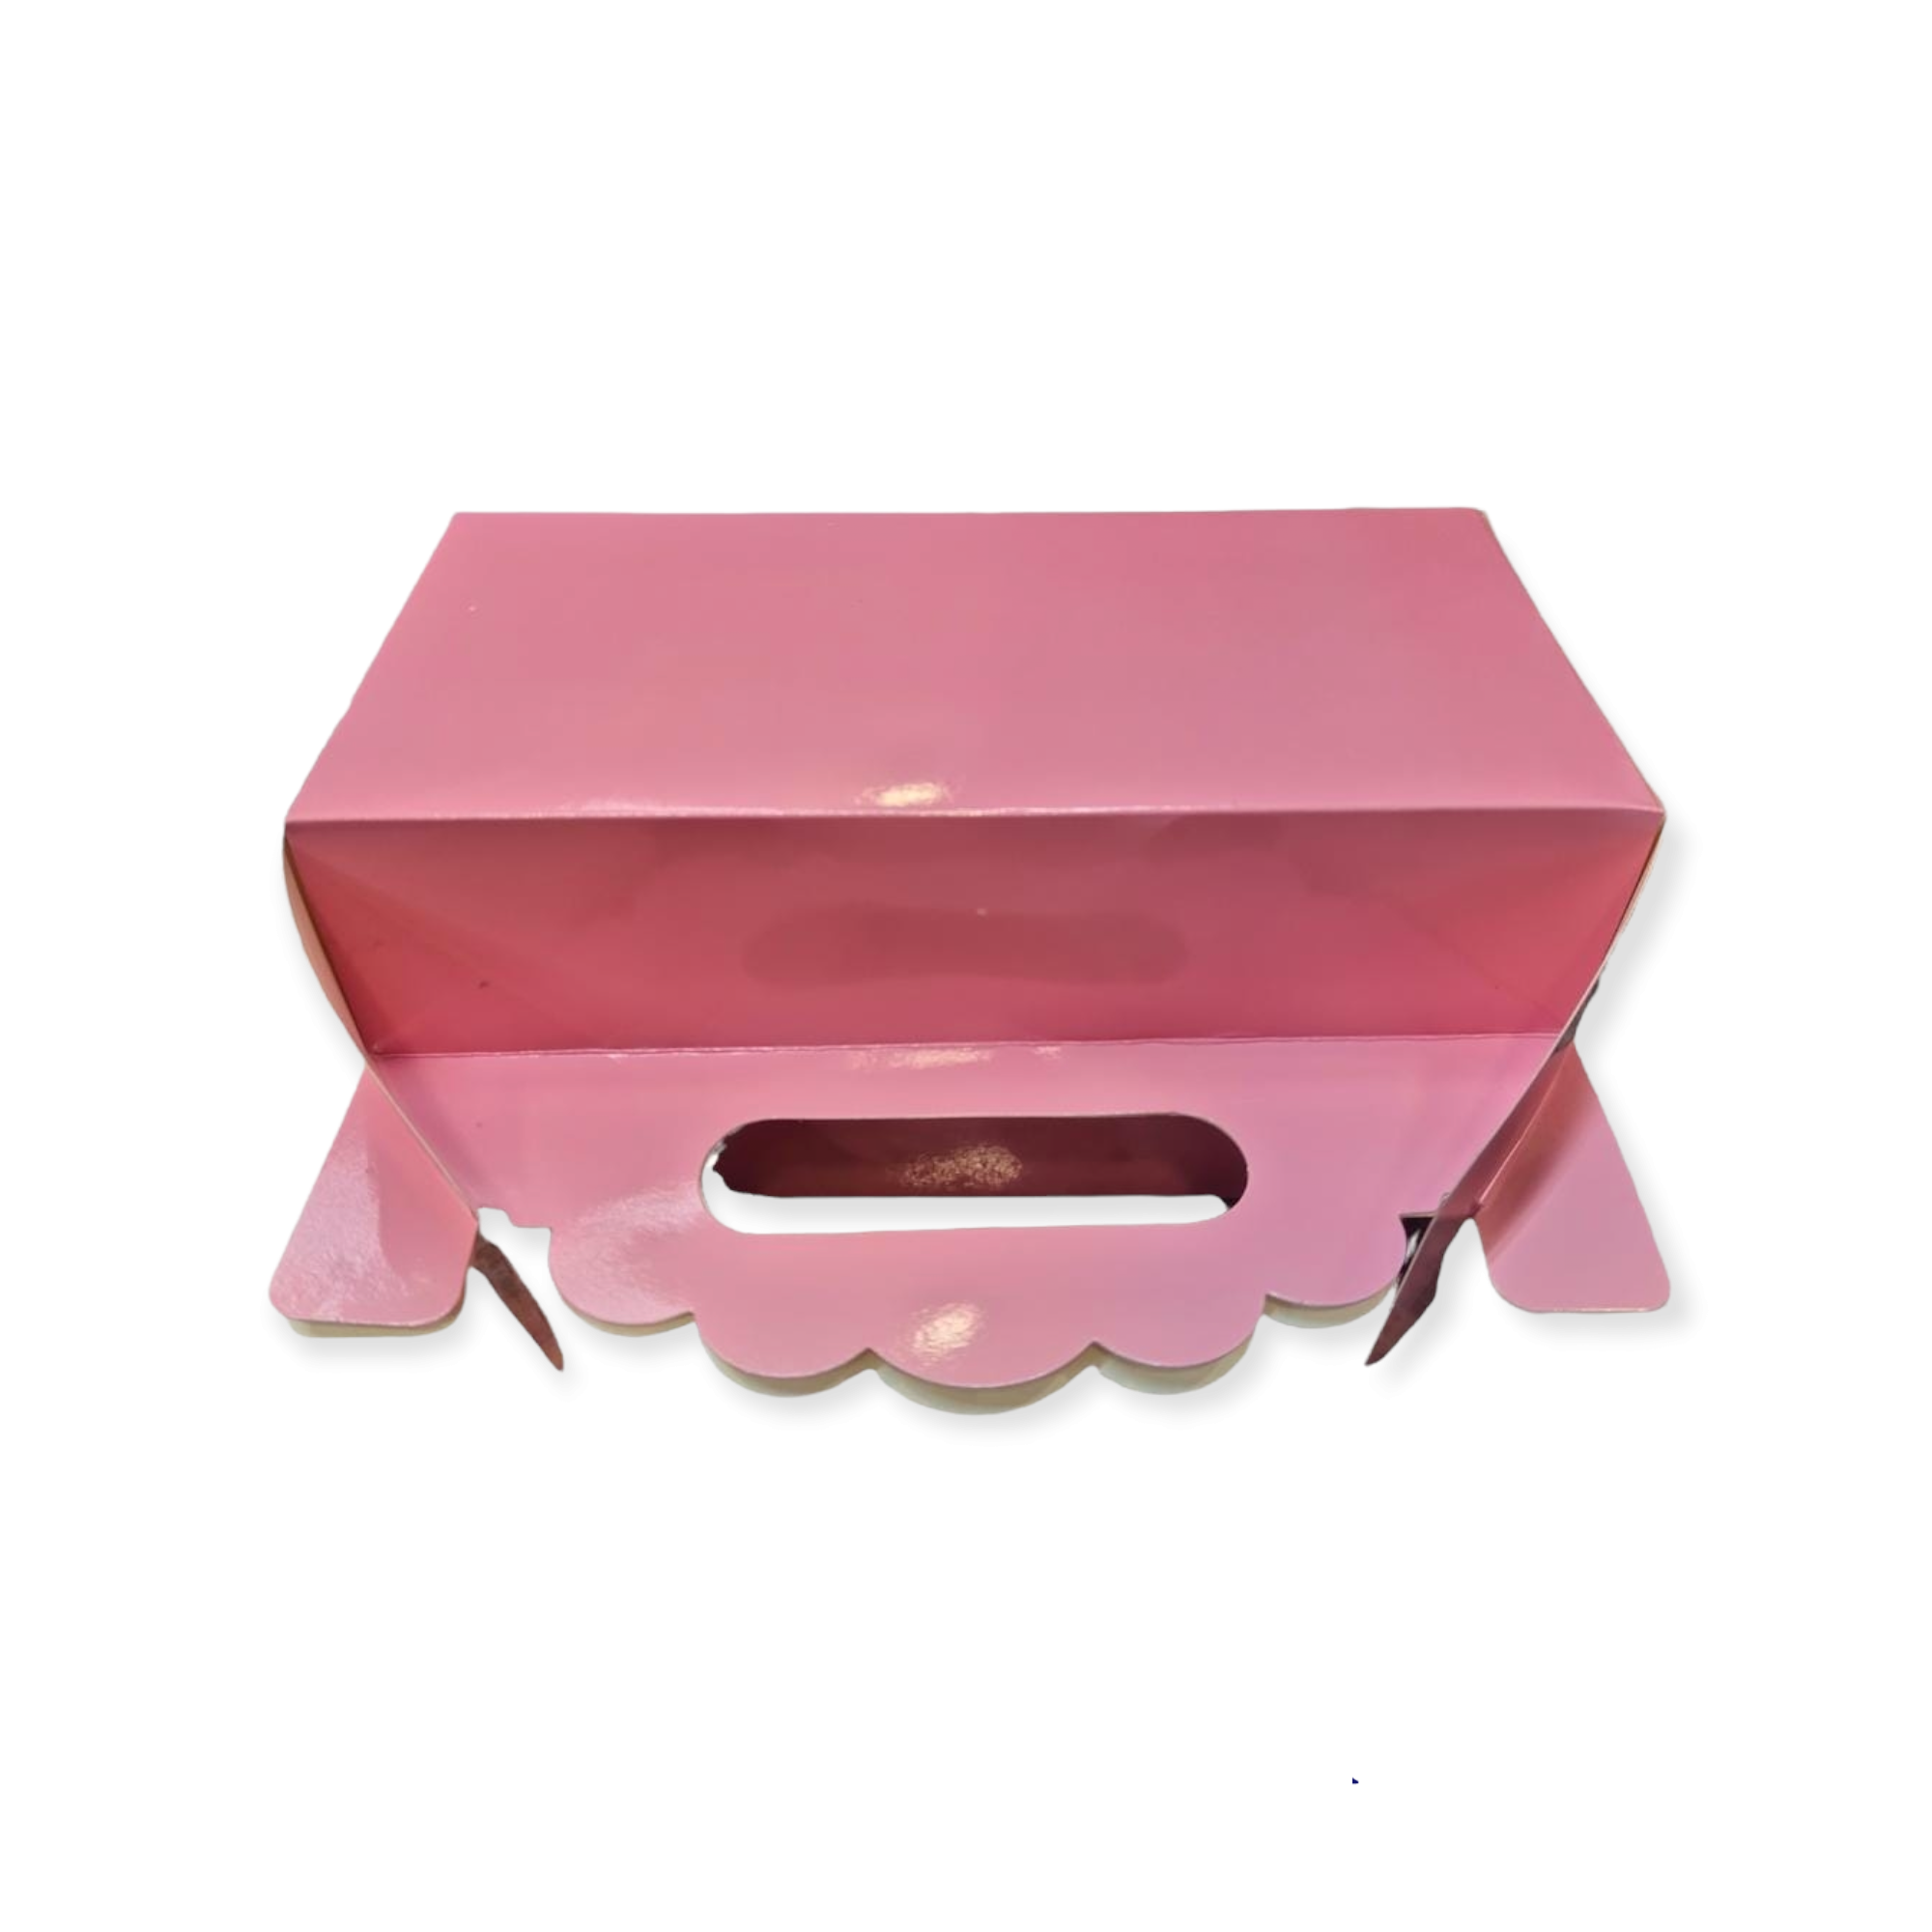 Gift Takeaway Party Treats Box 19x19x9cm with Handle 10pack